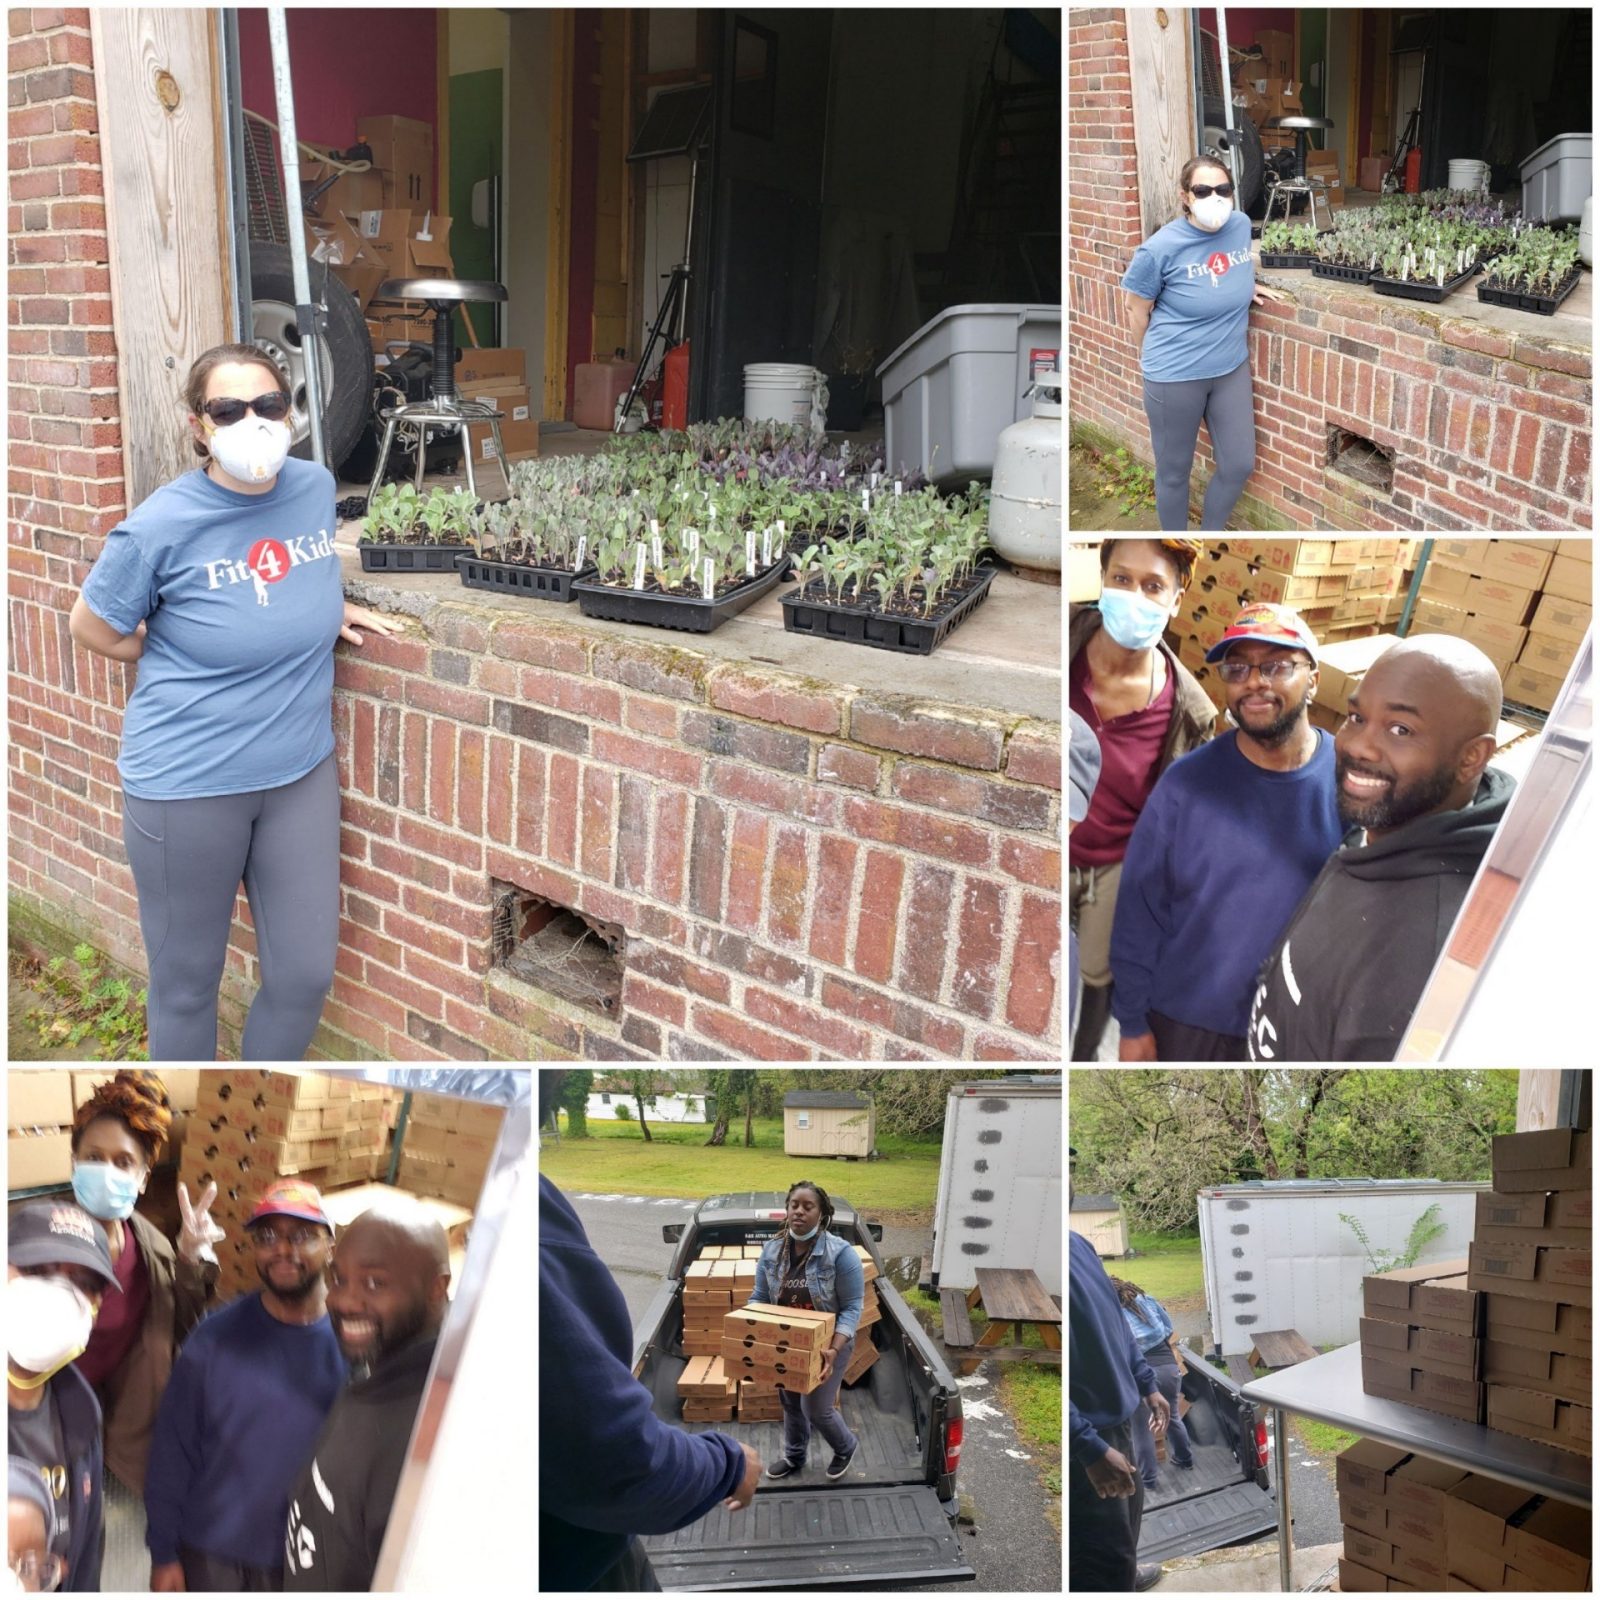 The PHOPs team and volunteers help with donations at the Urban Ag Center